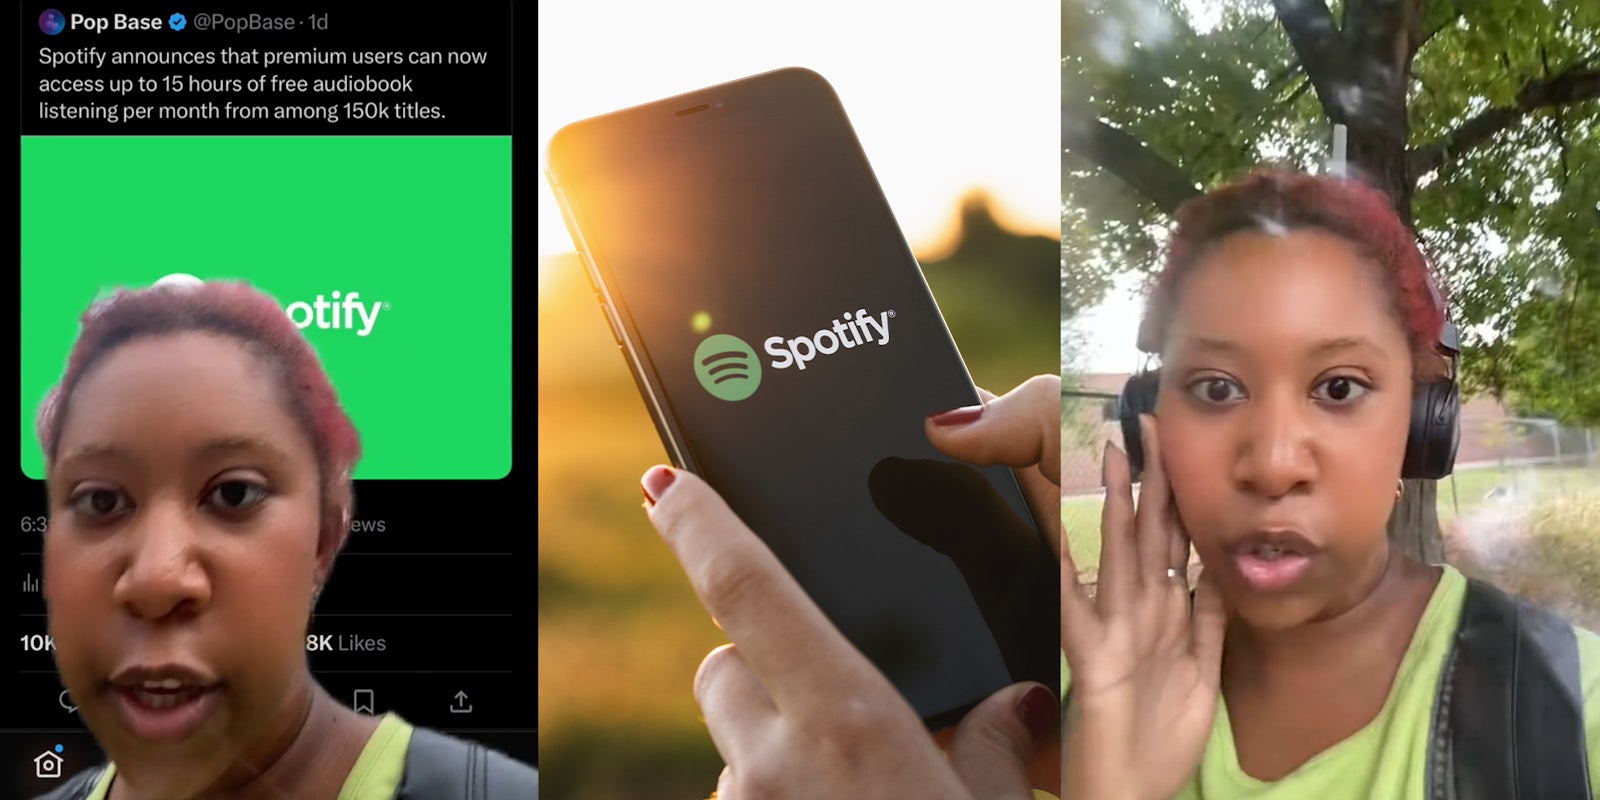 Customer roasts Spotify after they announced free audiobooks